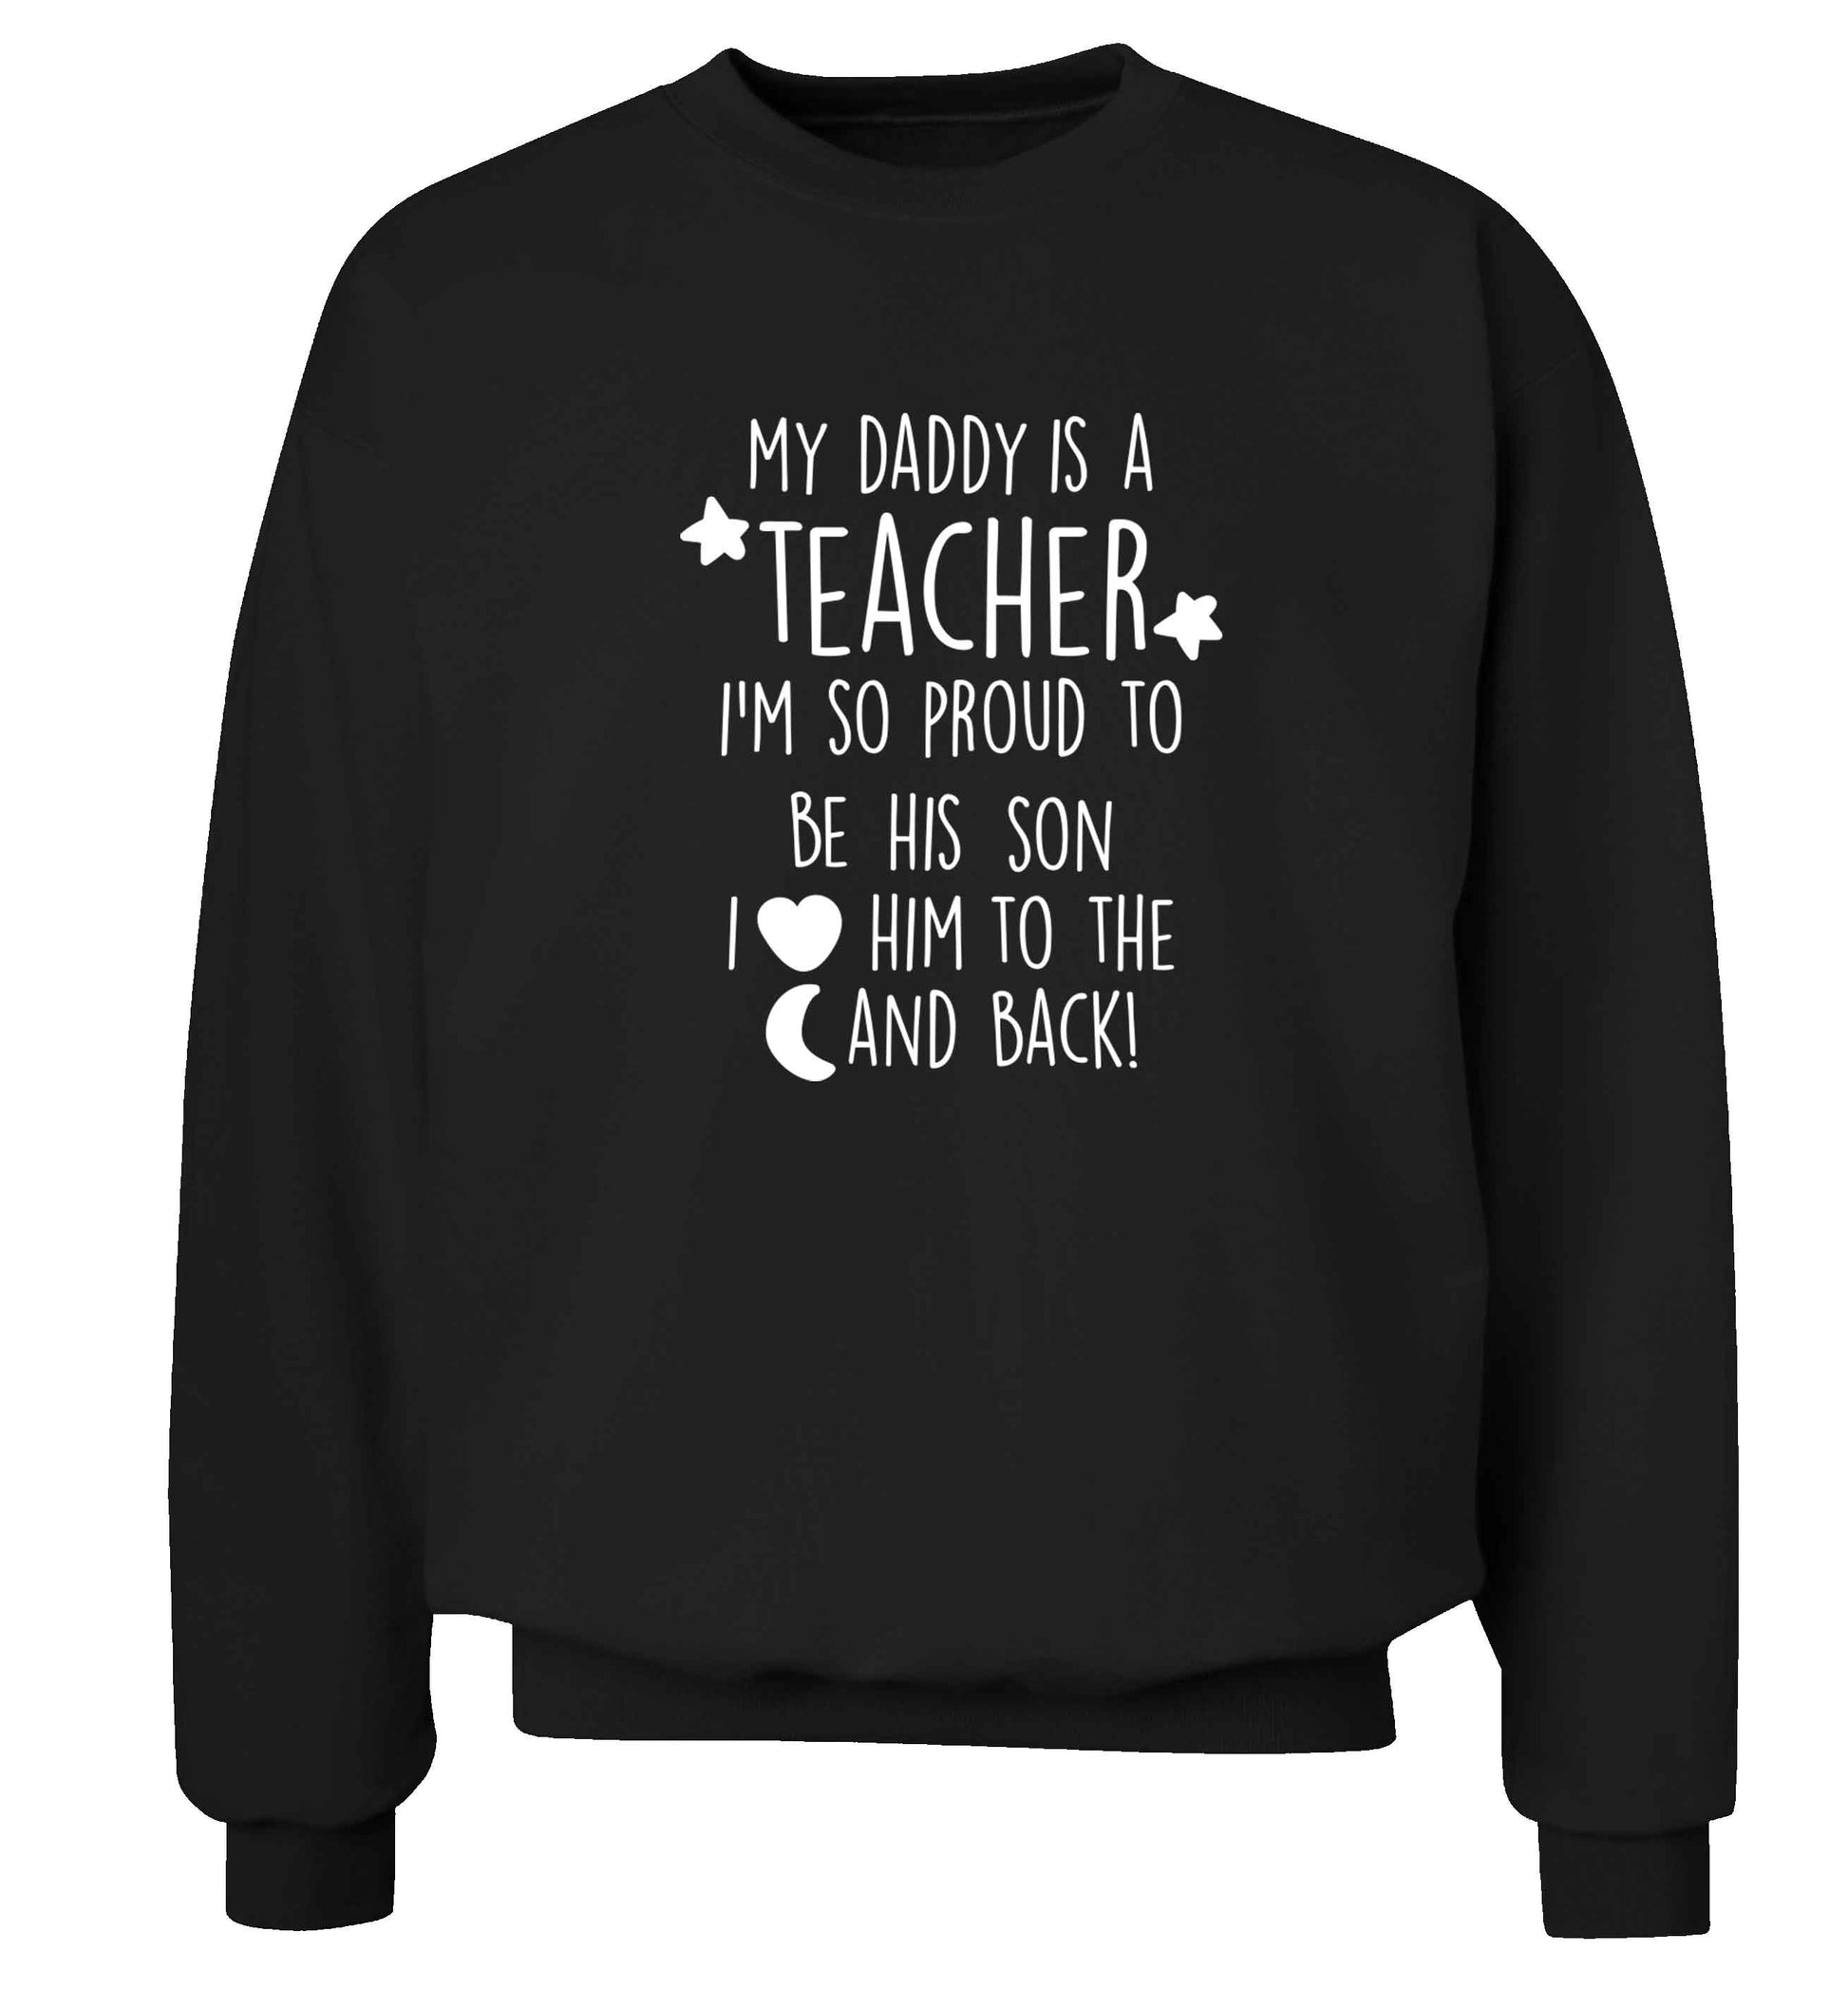 My daddy is a teacher I'm so proud to be his son I love her to the moon and back adult's unisex black sweater 2XL